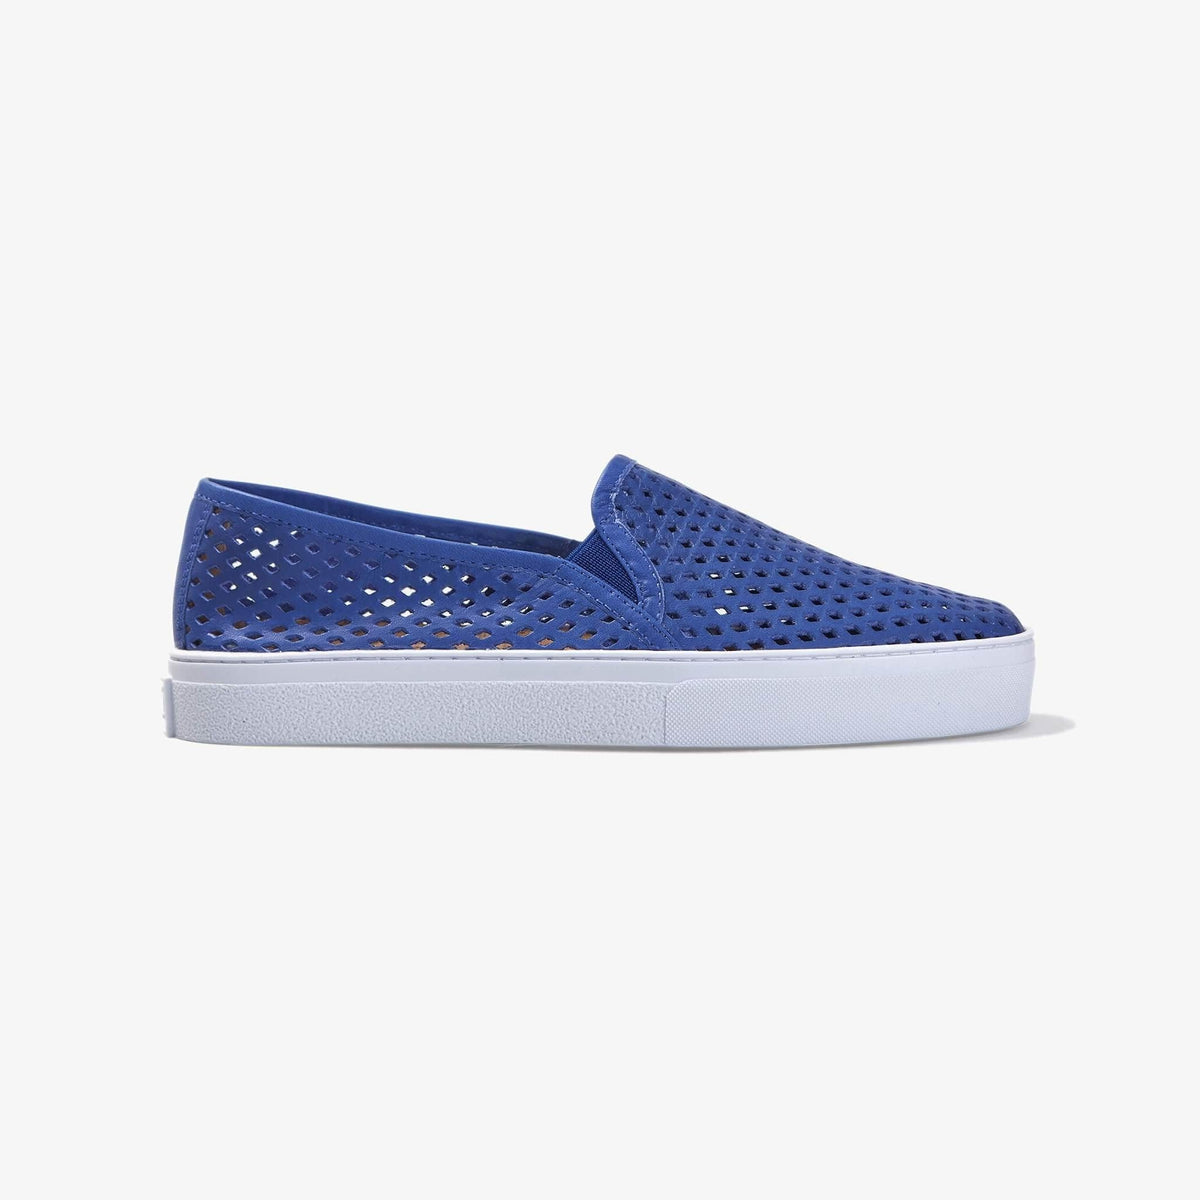 Jibs Classic Real Leather Slip-on Shoe in Galaxy Blue